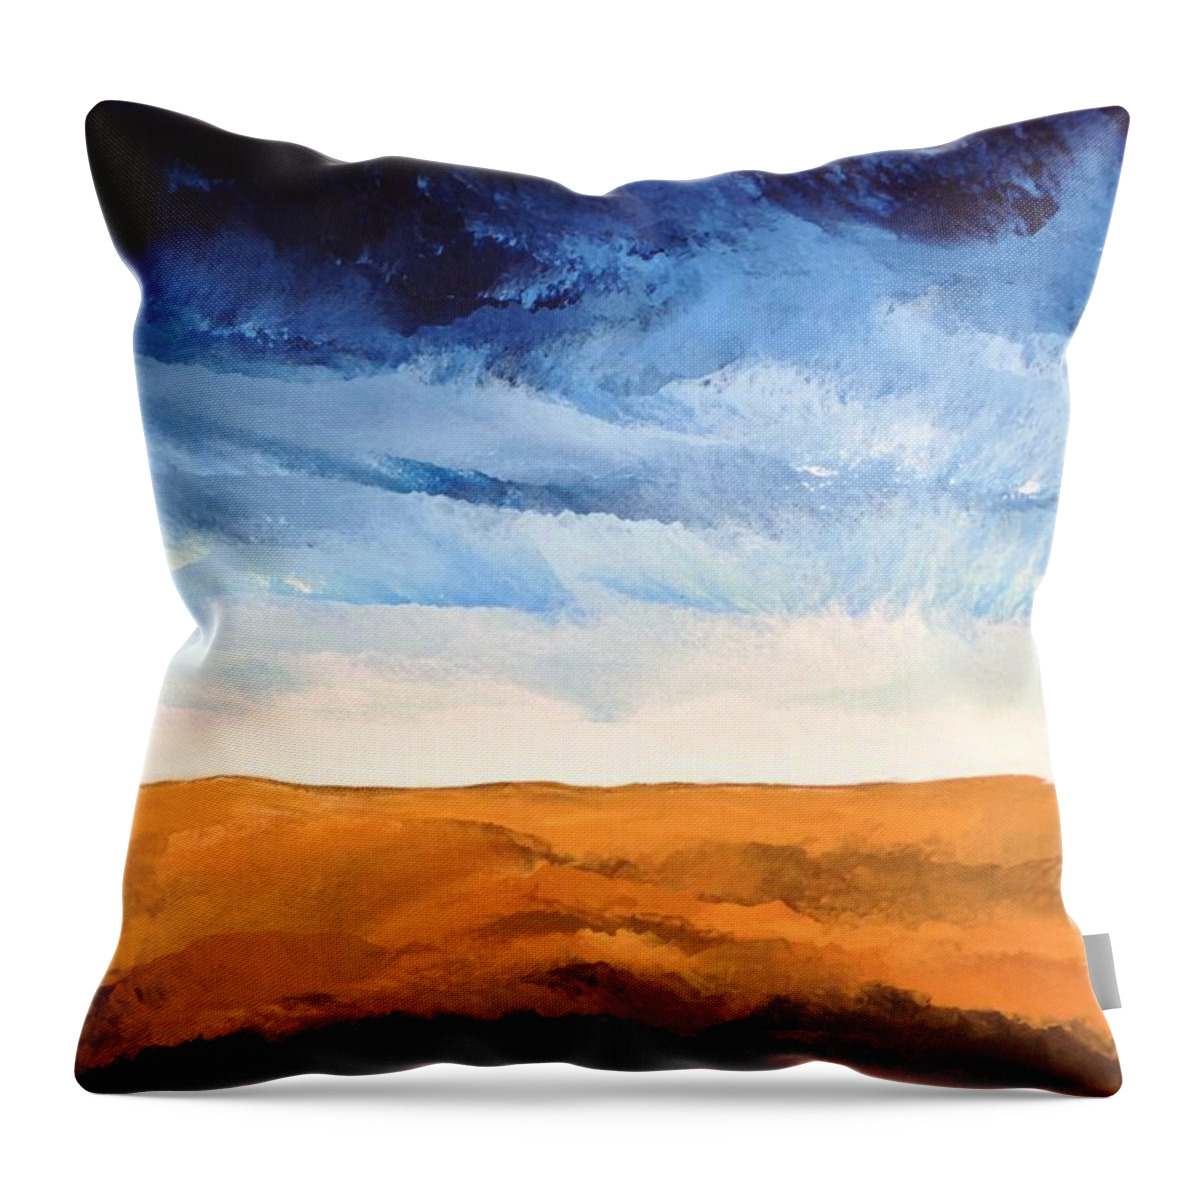 Dark Blue Sky Throw Pillow featuring the painting In The Distance by Linda Bailey